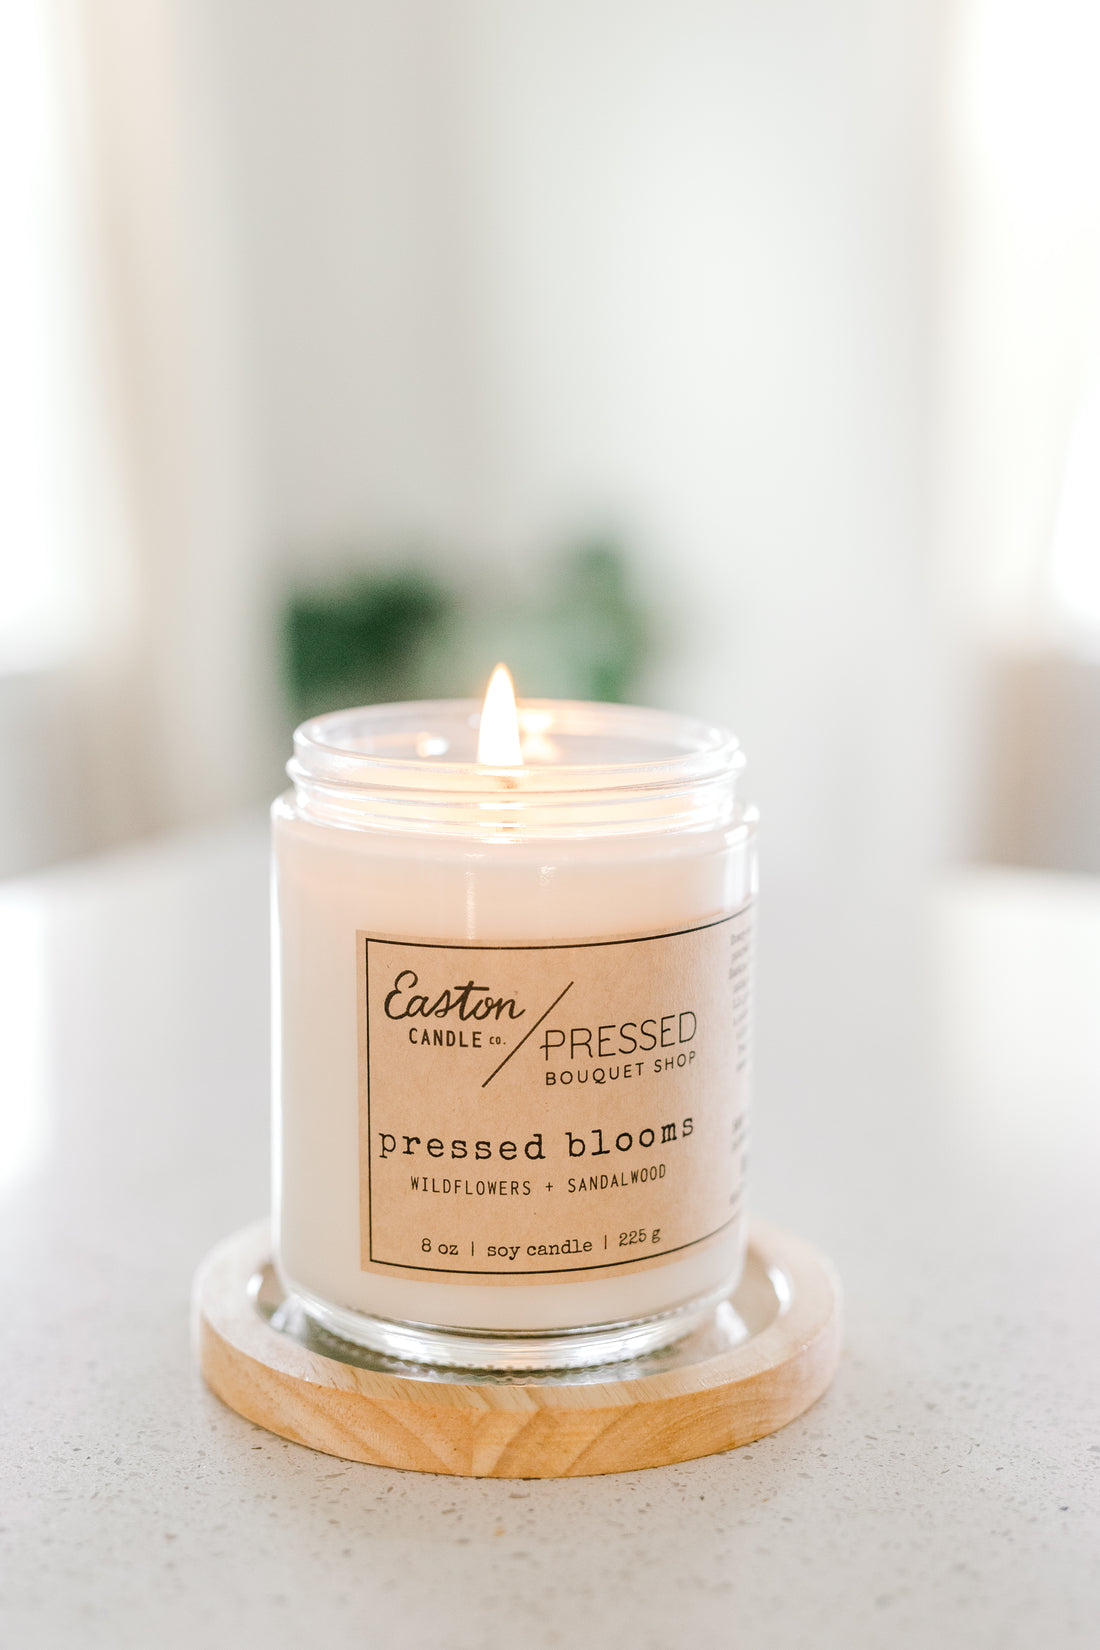 Pressed Blooms soy candle